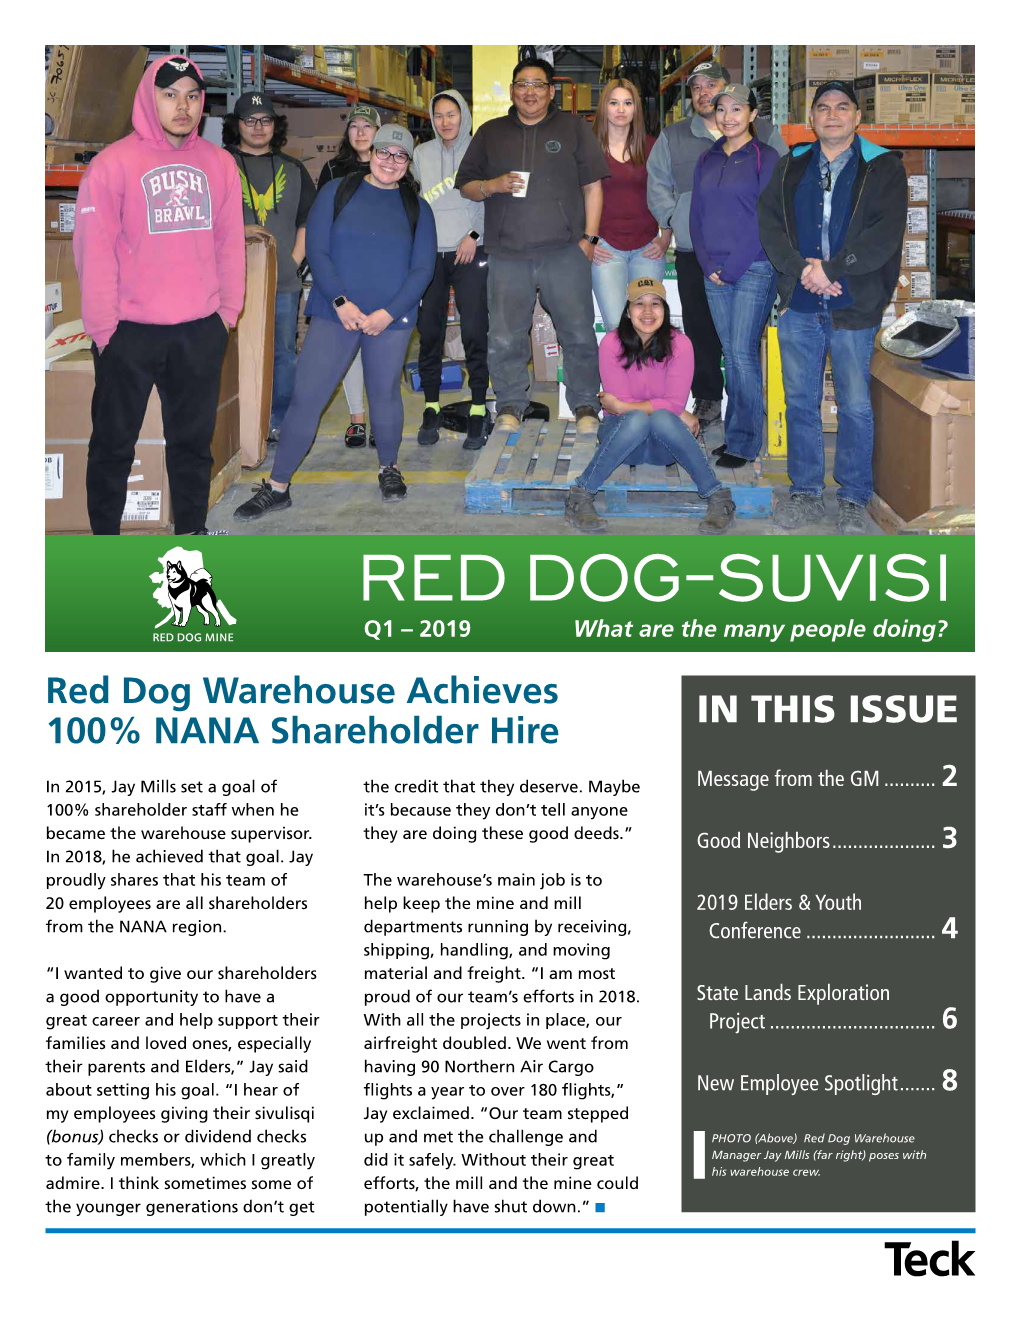 RED DOG-SUVISI Q1 – 2019 What Are the Many People Doing?